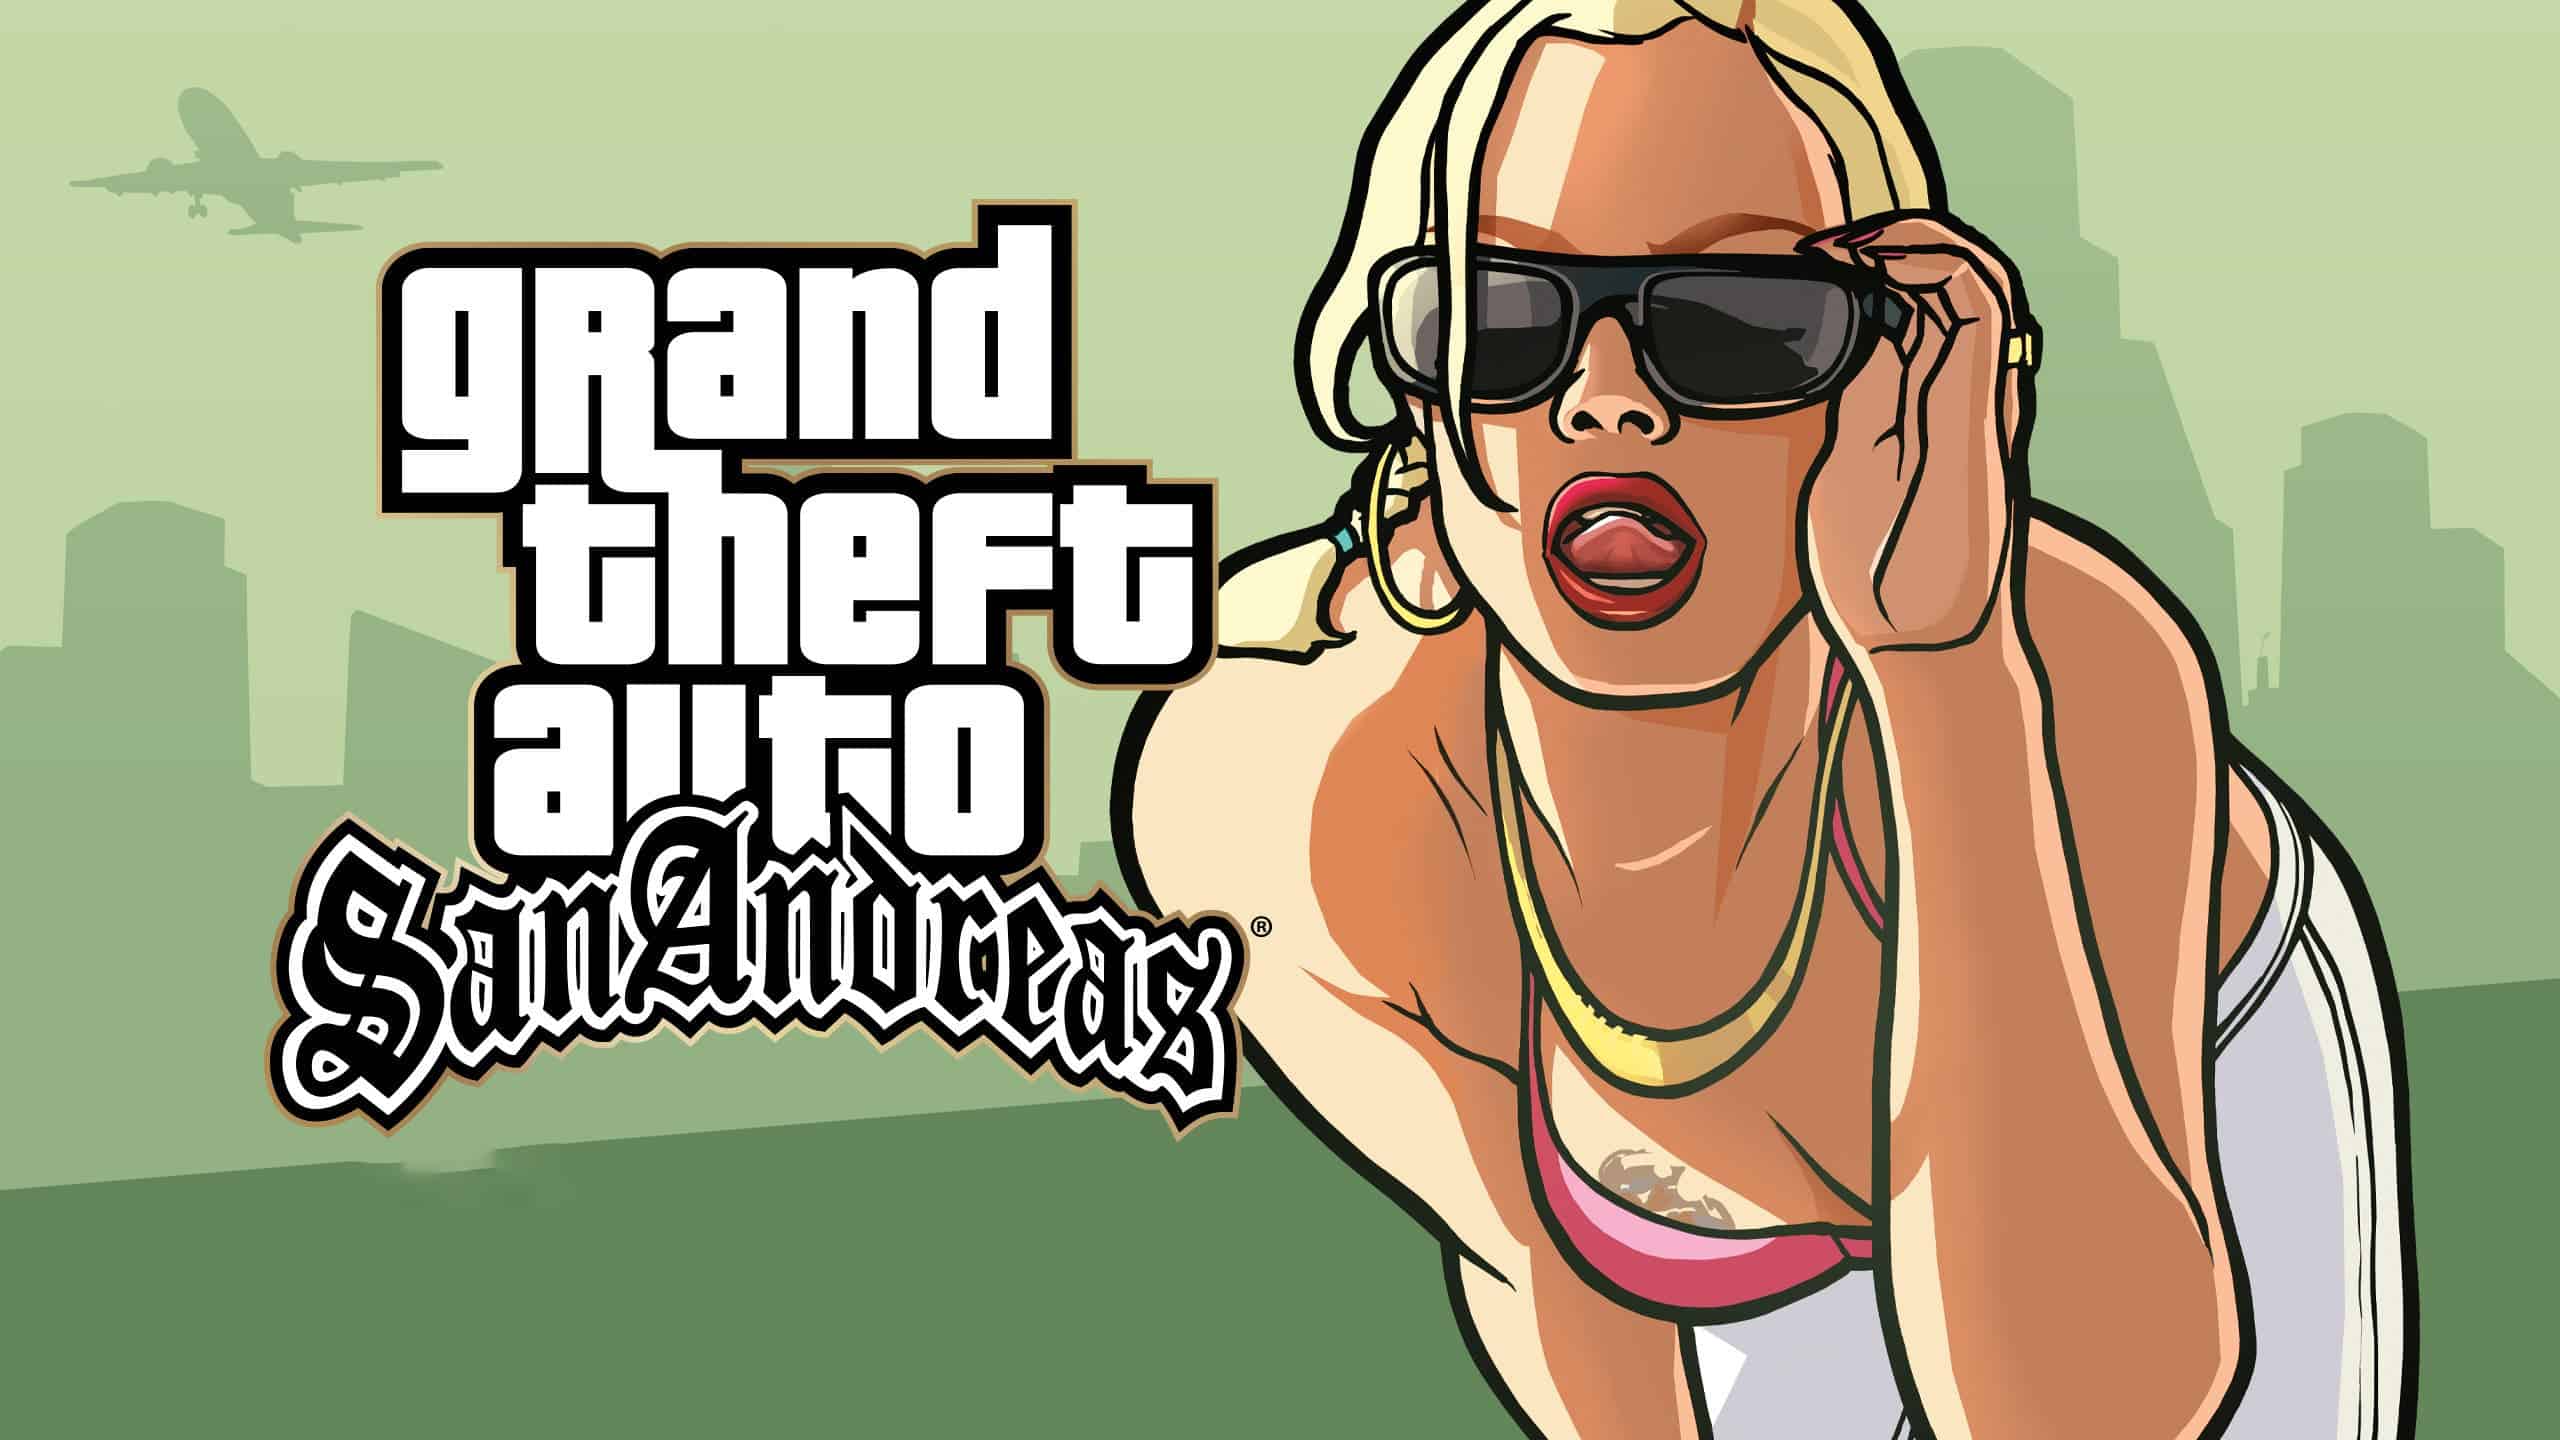 Grand Theft Auto San Andreas offline game for iPhone